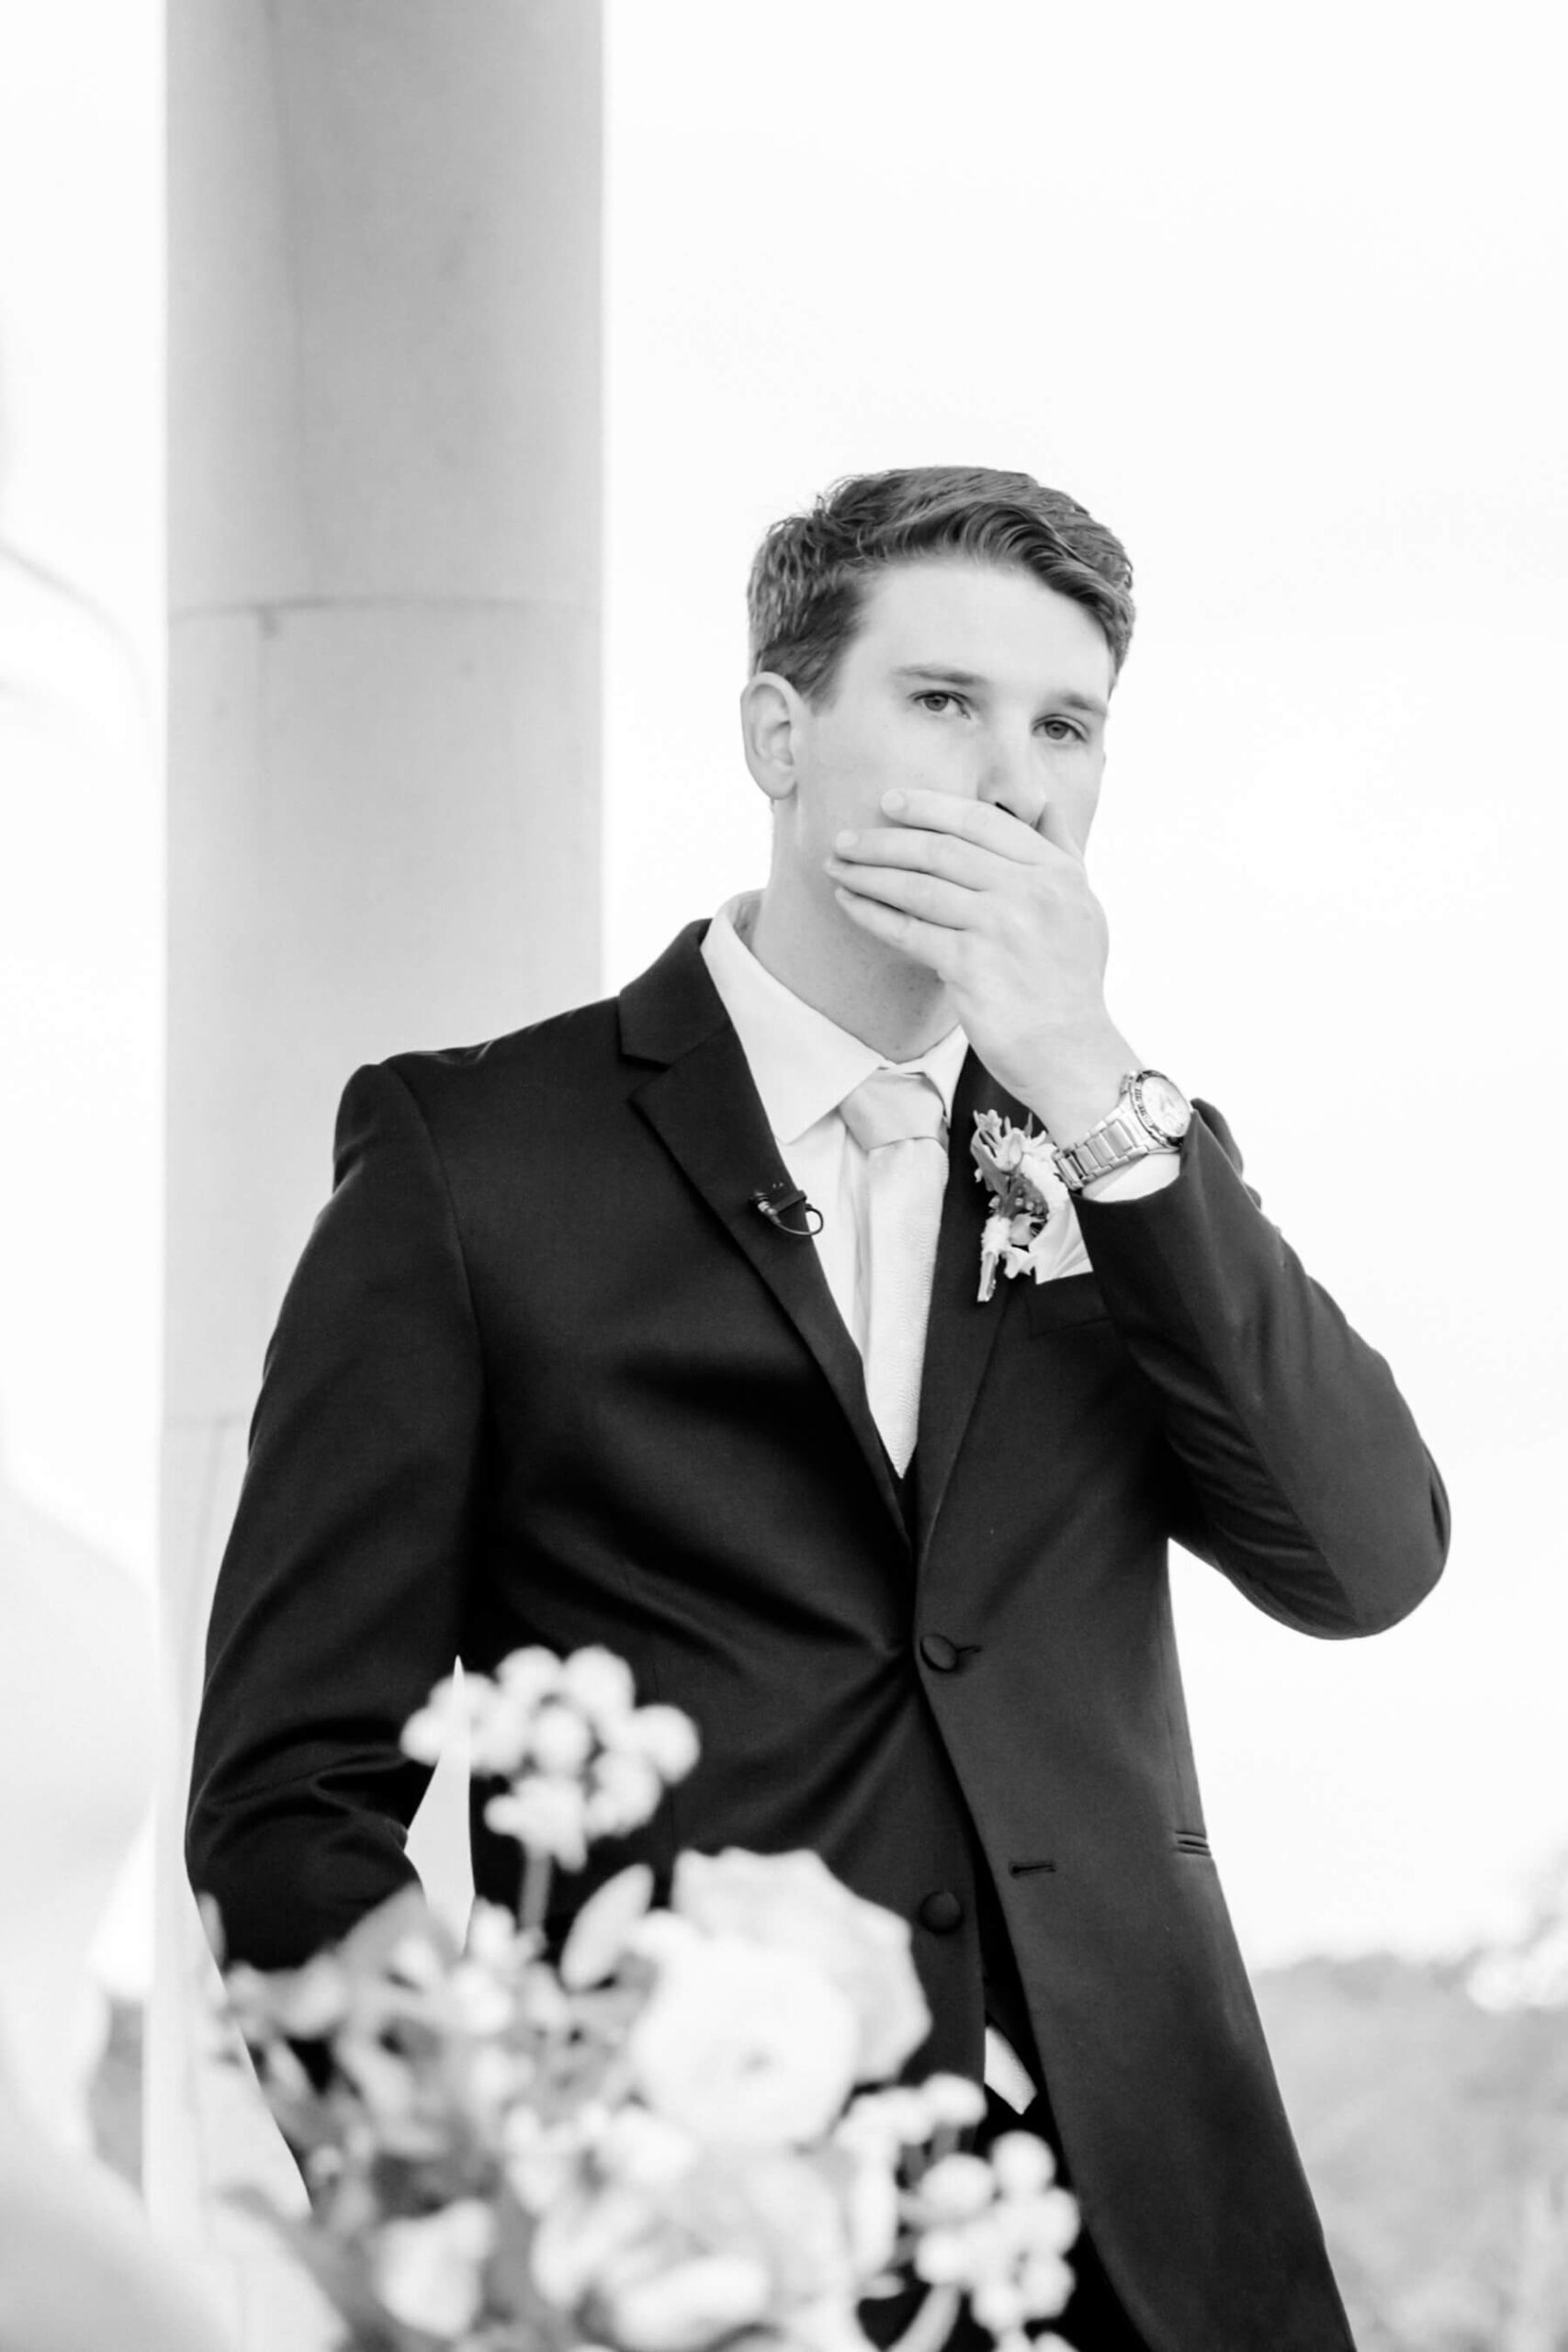 Groom placing his hand over mouth as bride walks down the aisle